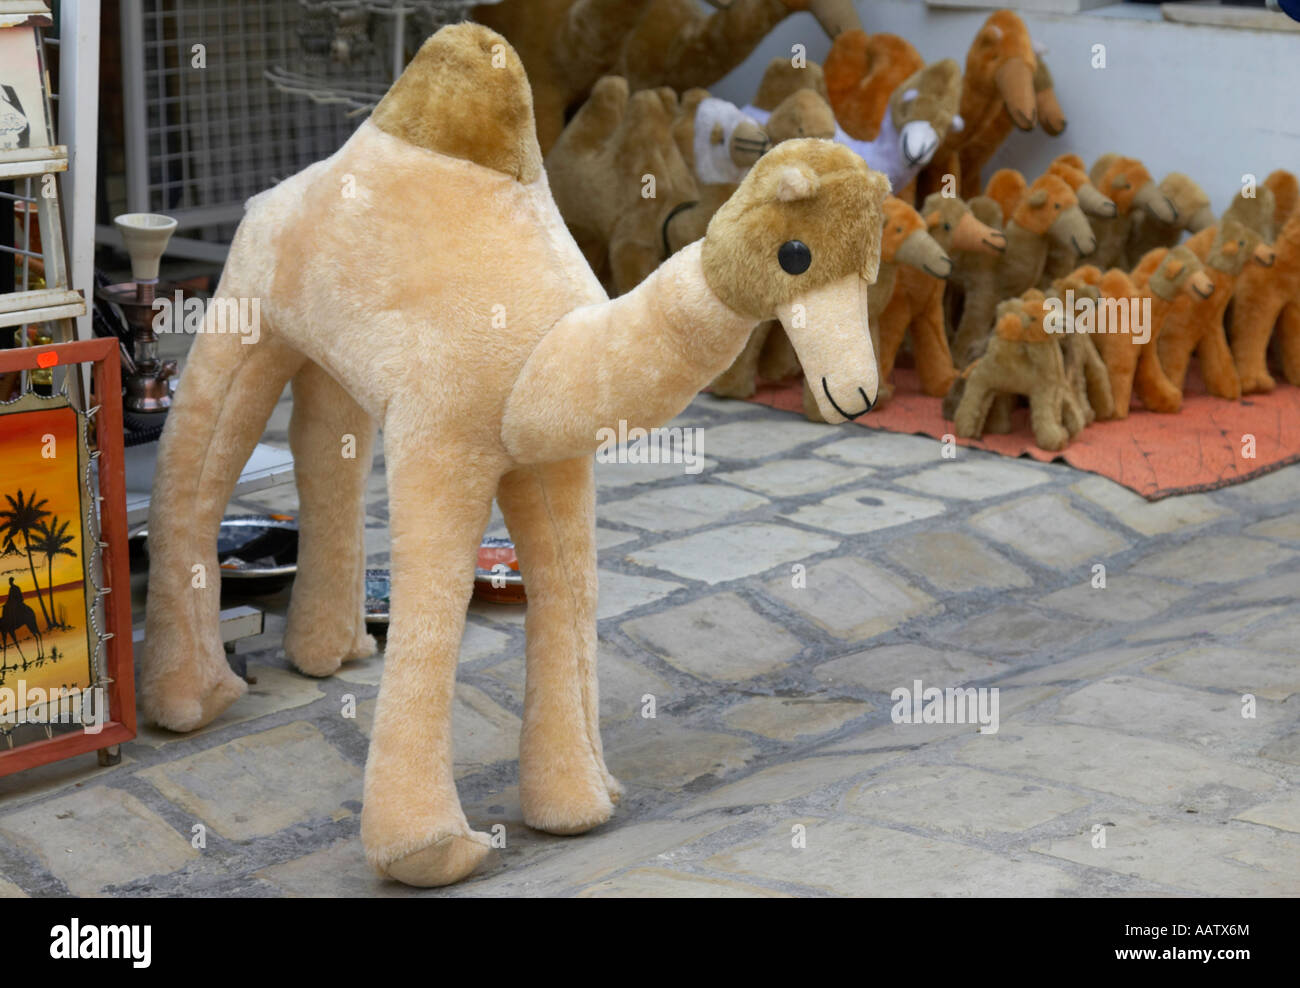 large soft toy stuffed camel souvenir at market stall in nabeul tunisia Stock Photo